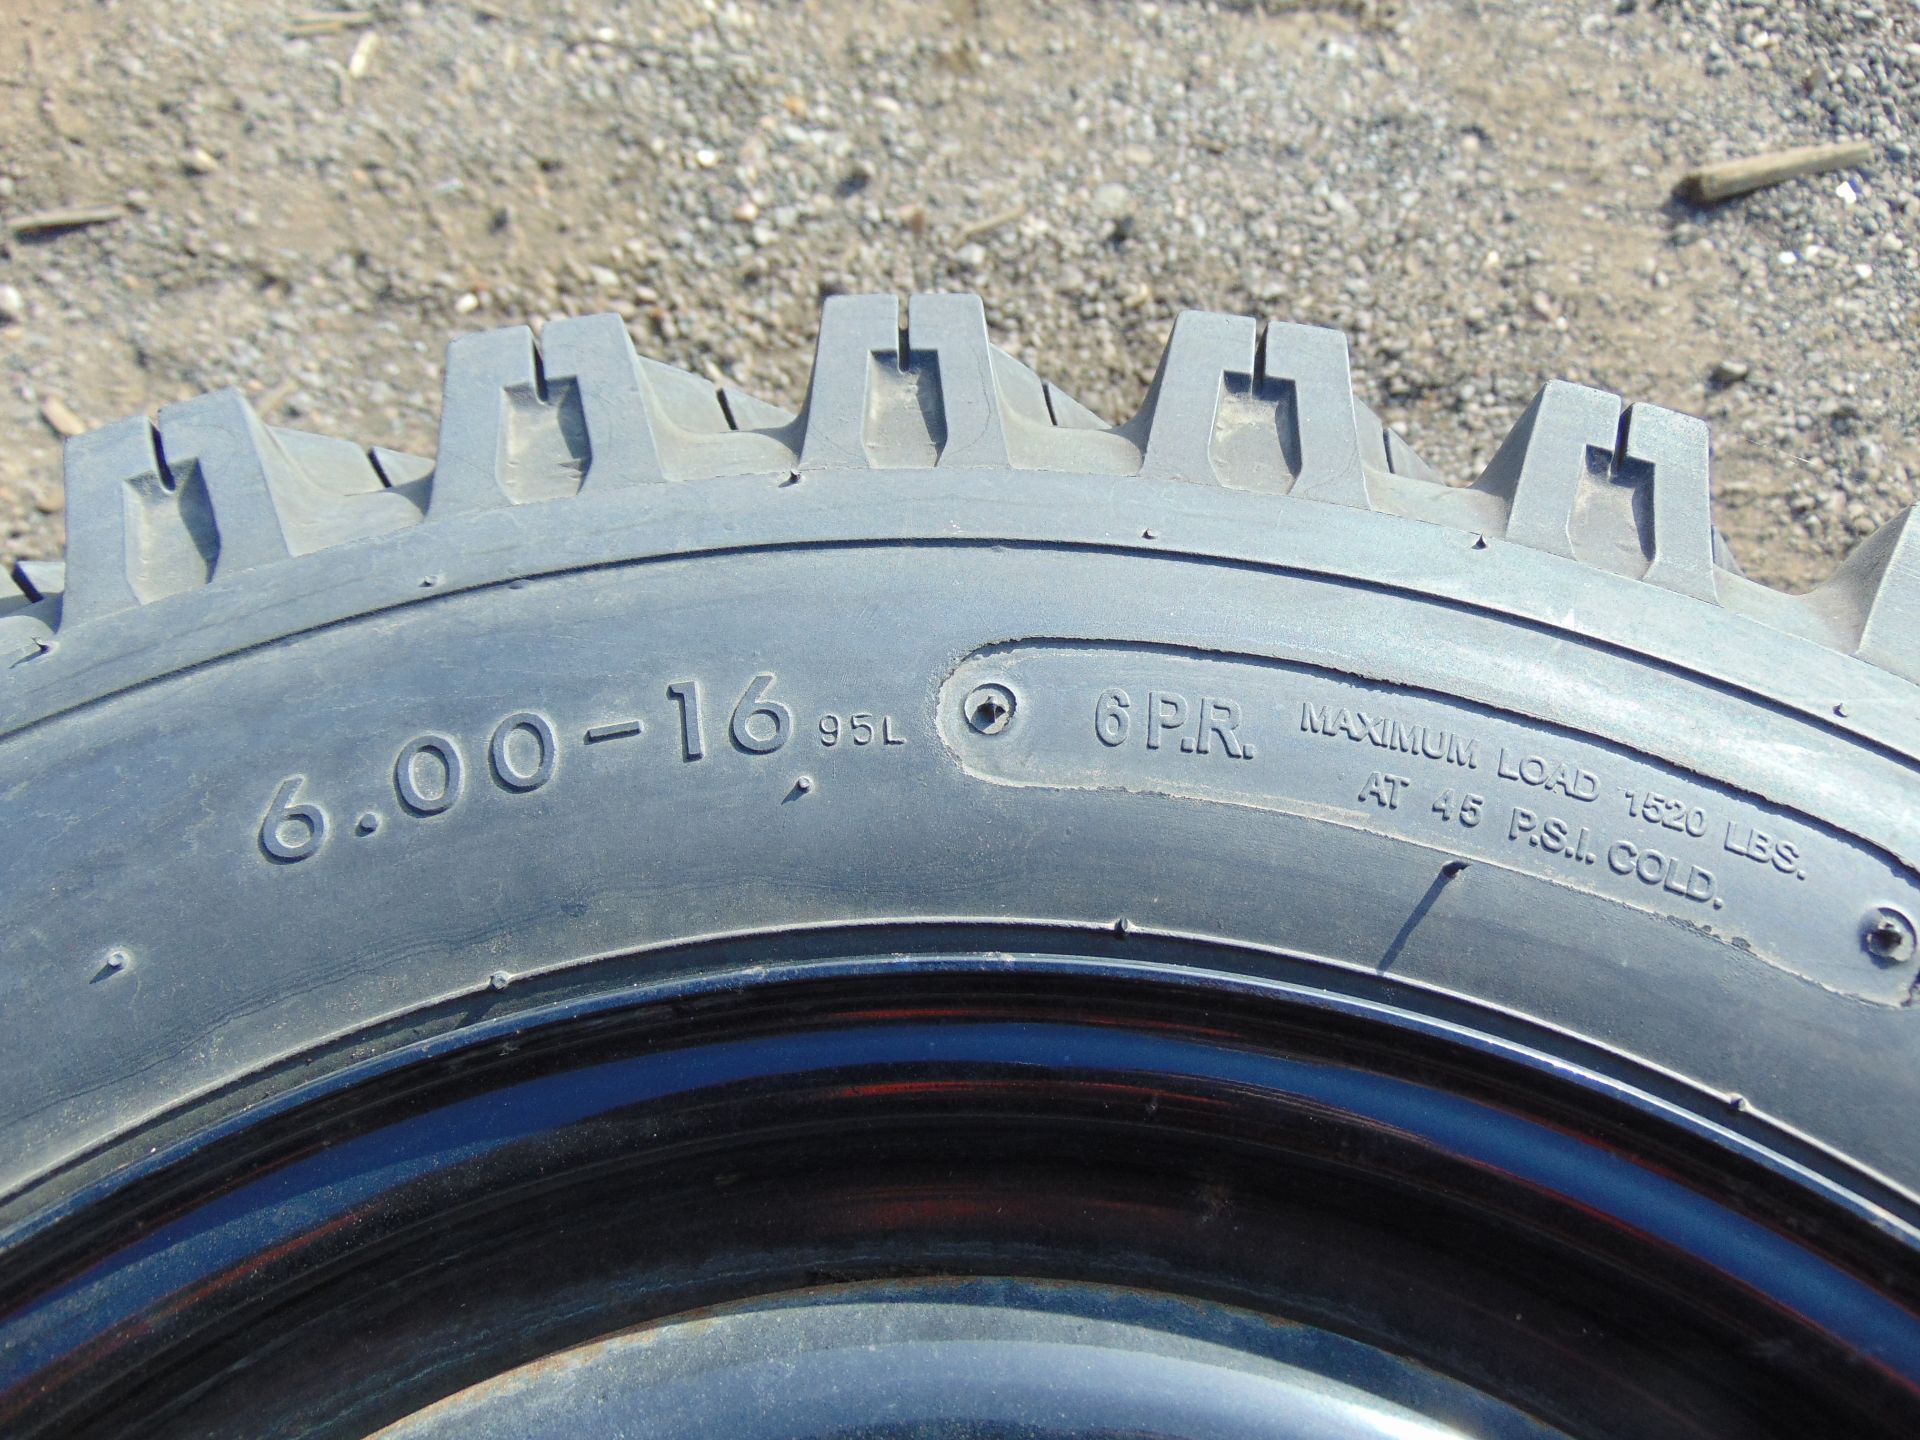 4 x Deestone Extra Traction 6.00-16 Tyres with 5 Stud Rims - Image 6 of 7